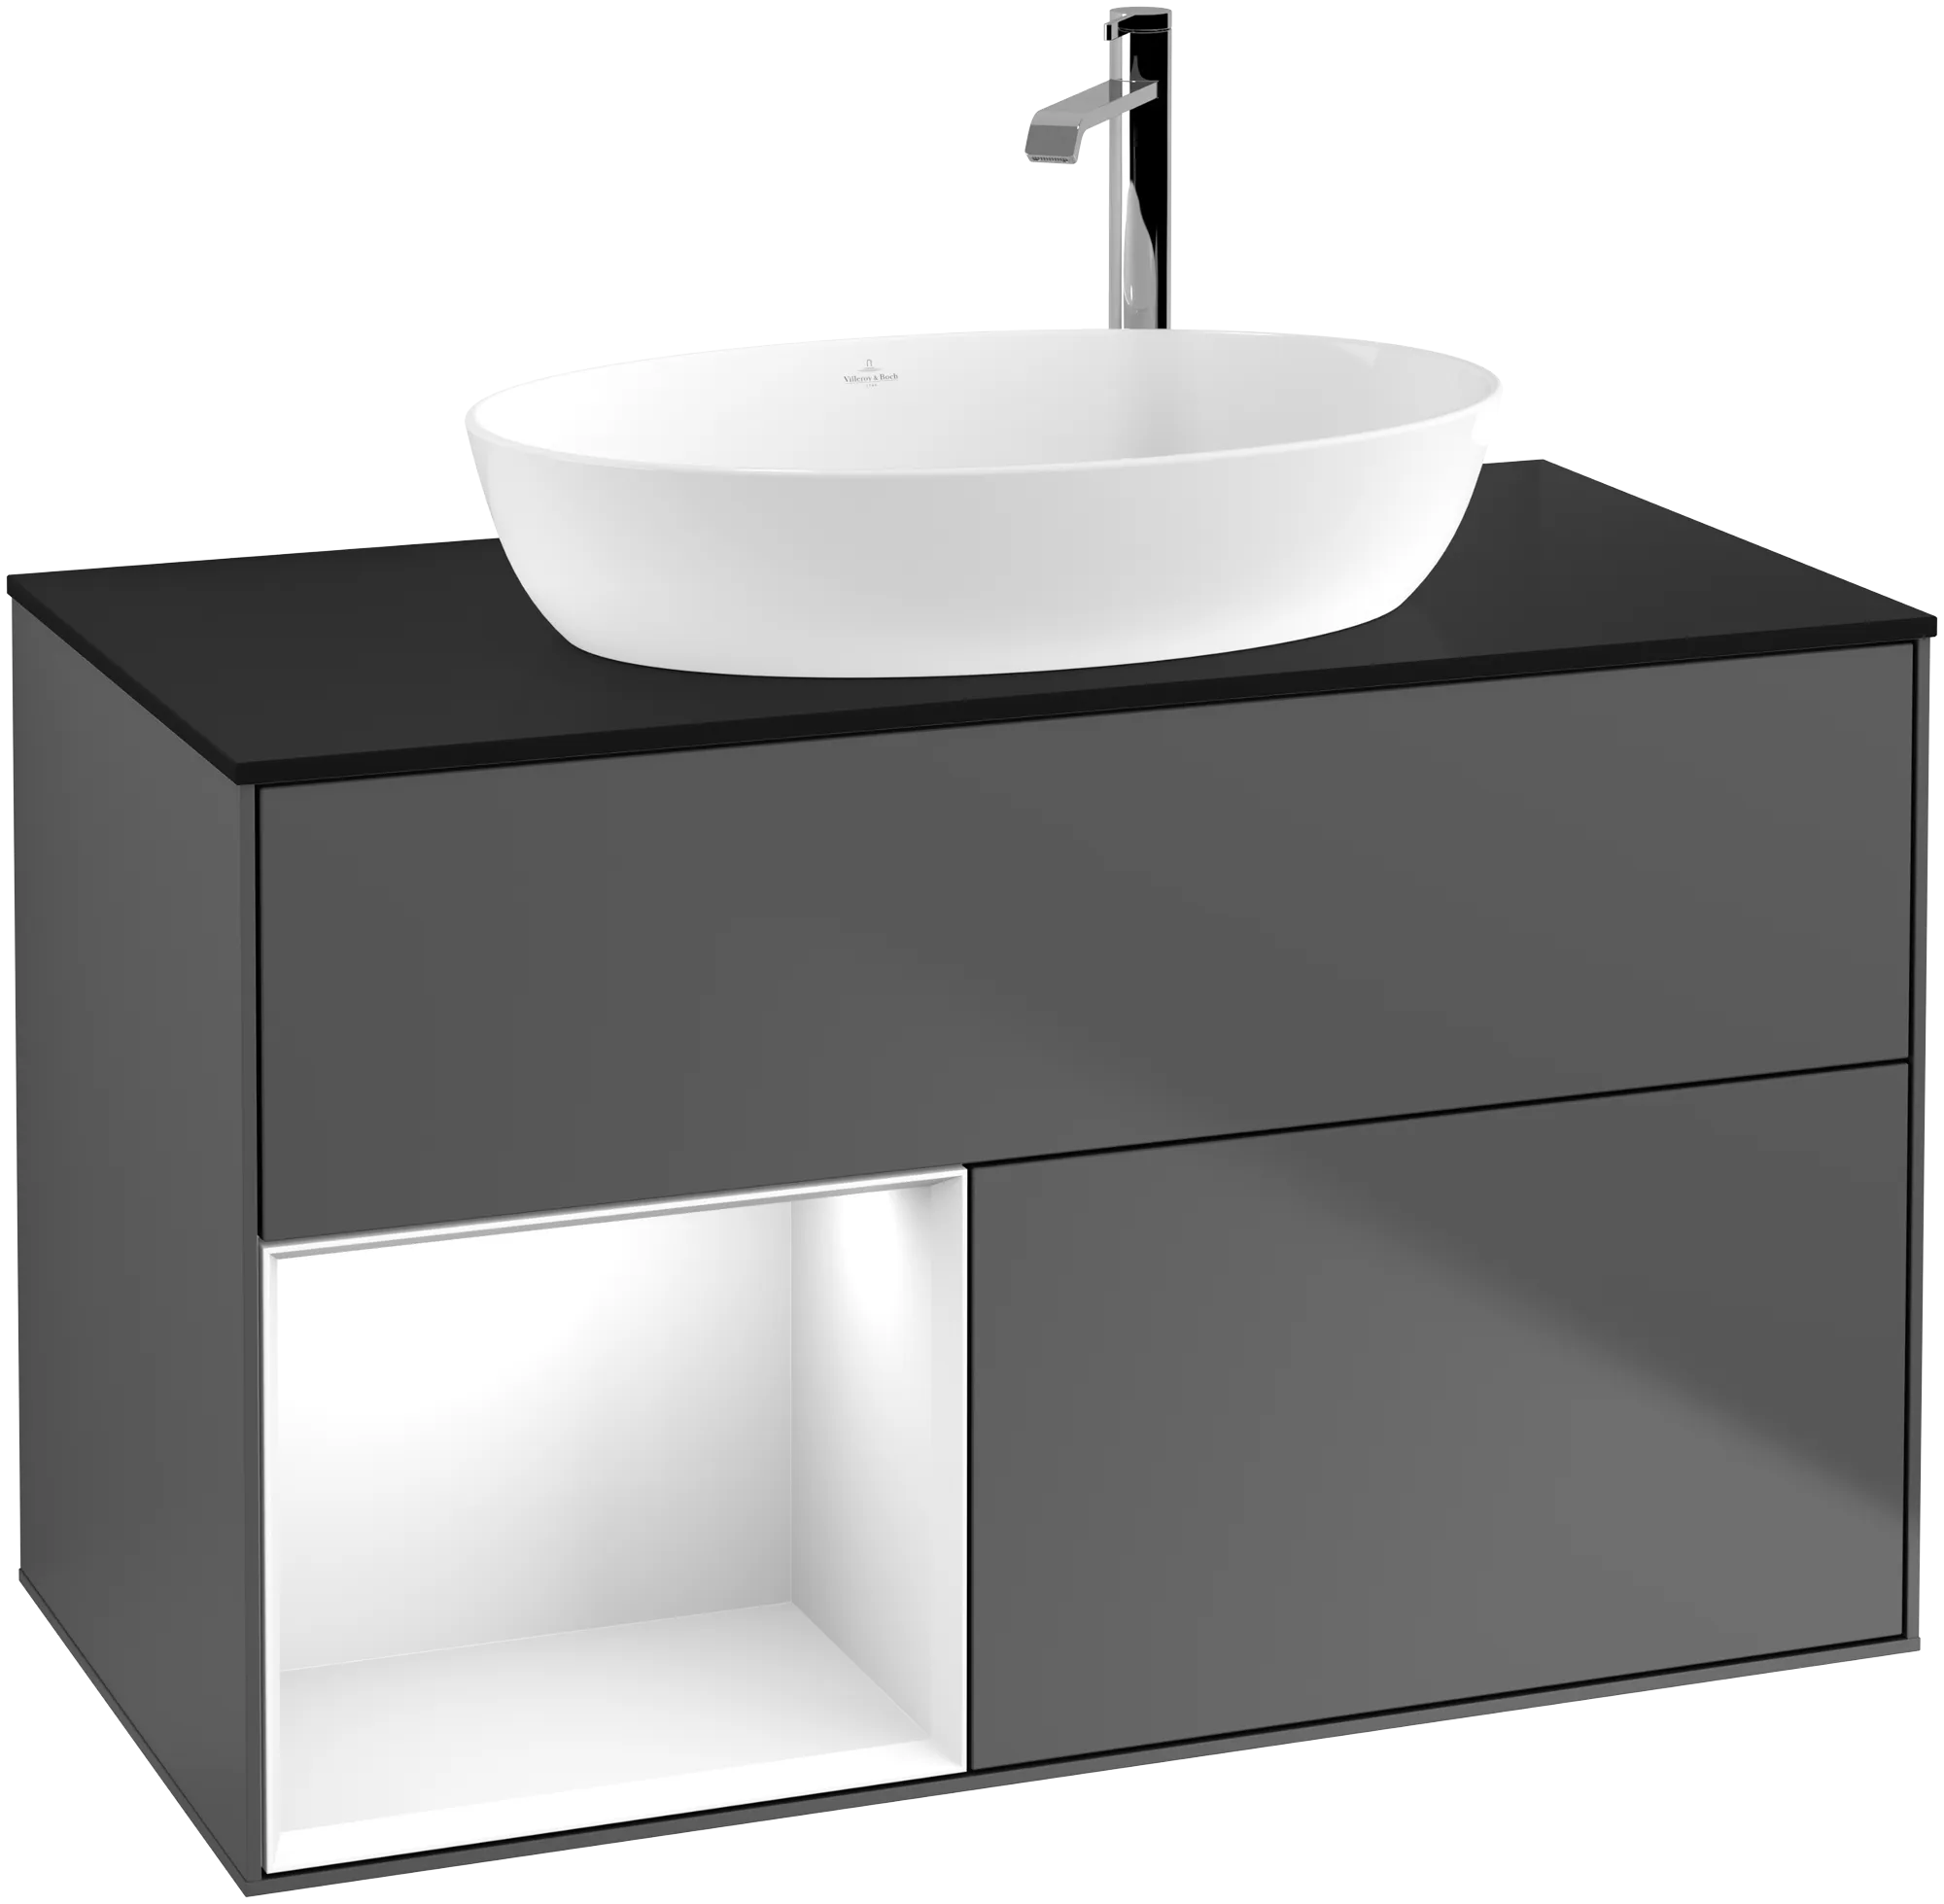 Picture of VILLEROY BOCH Finion Vanity unit, with lighting, 2 pull-out compartments, 1000 x 603 x 501 mm, Anthracite Matt Lacquer / Glossy White Lacquer / Glass Black Matt #G892GFGK